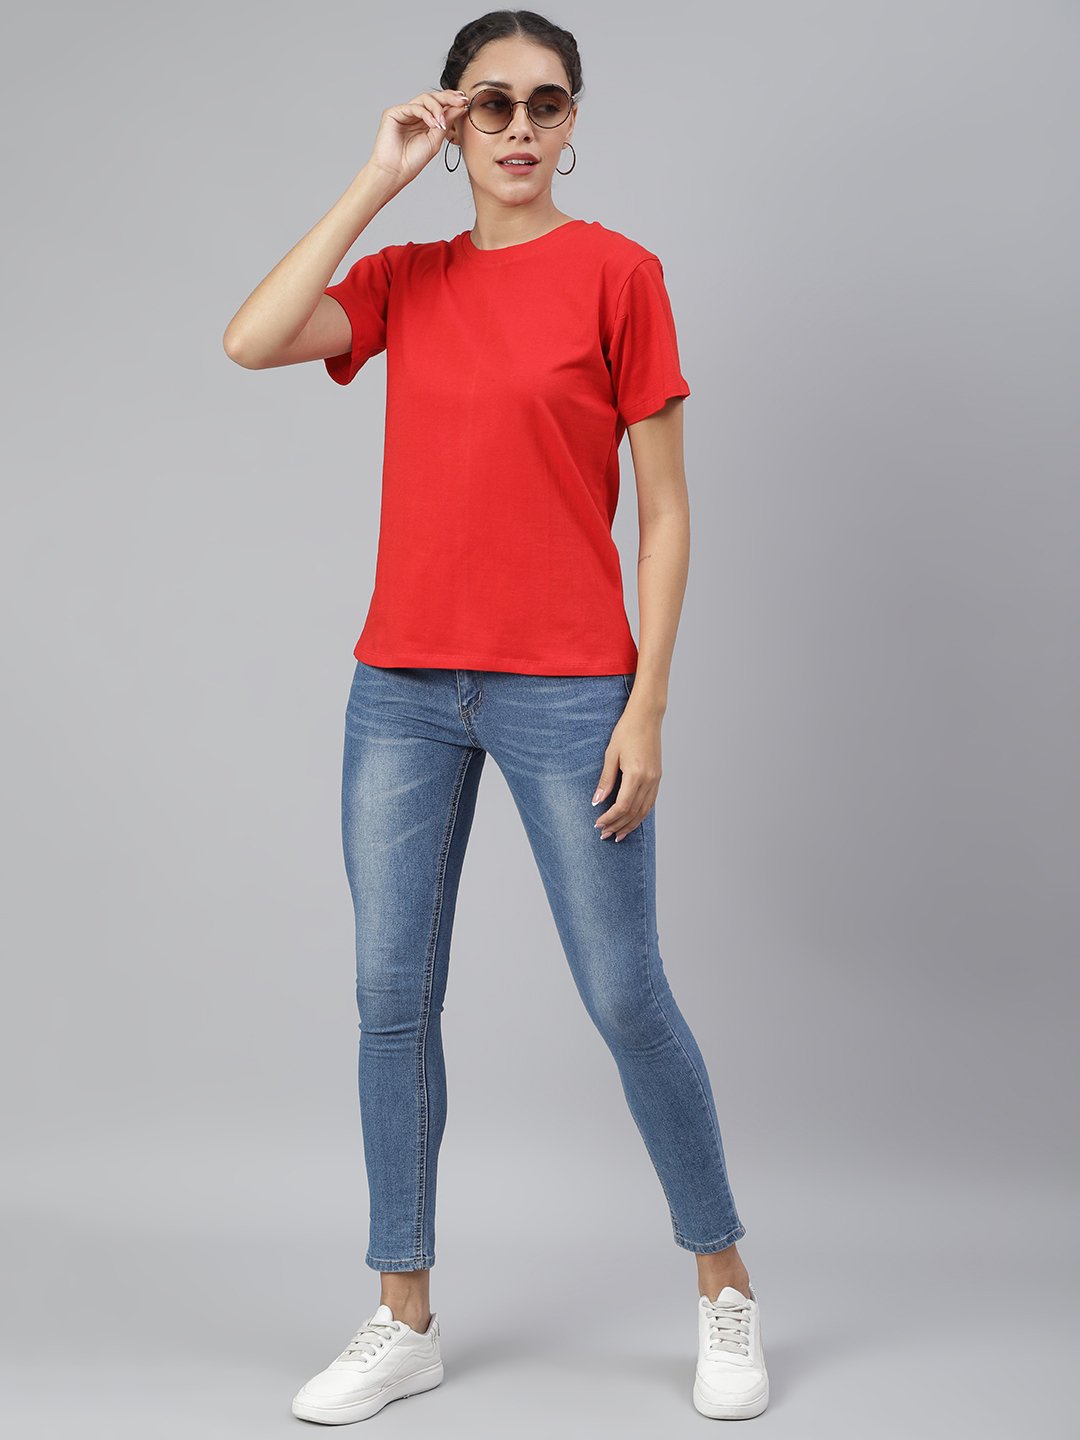 SCORPIUS Red Loose Fit Tshirt